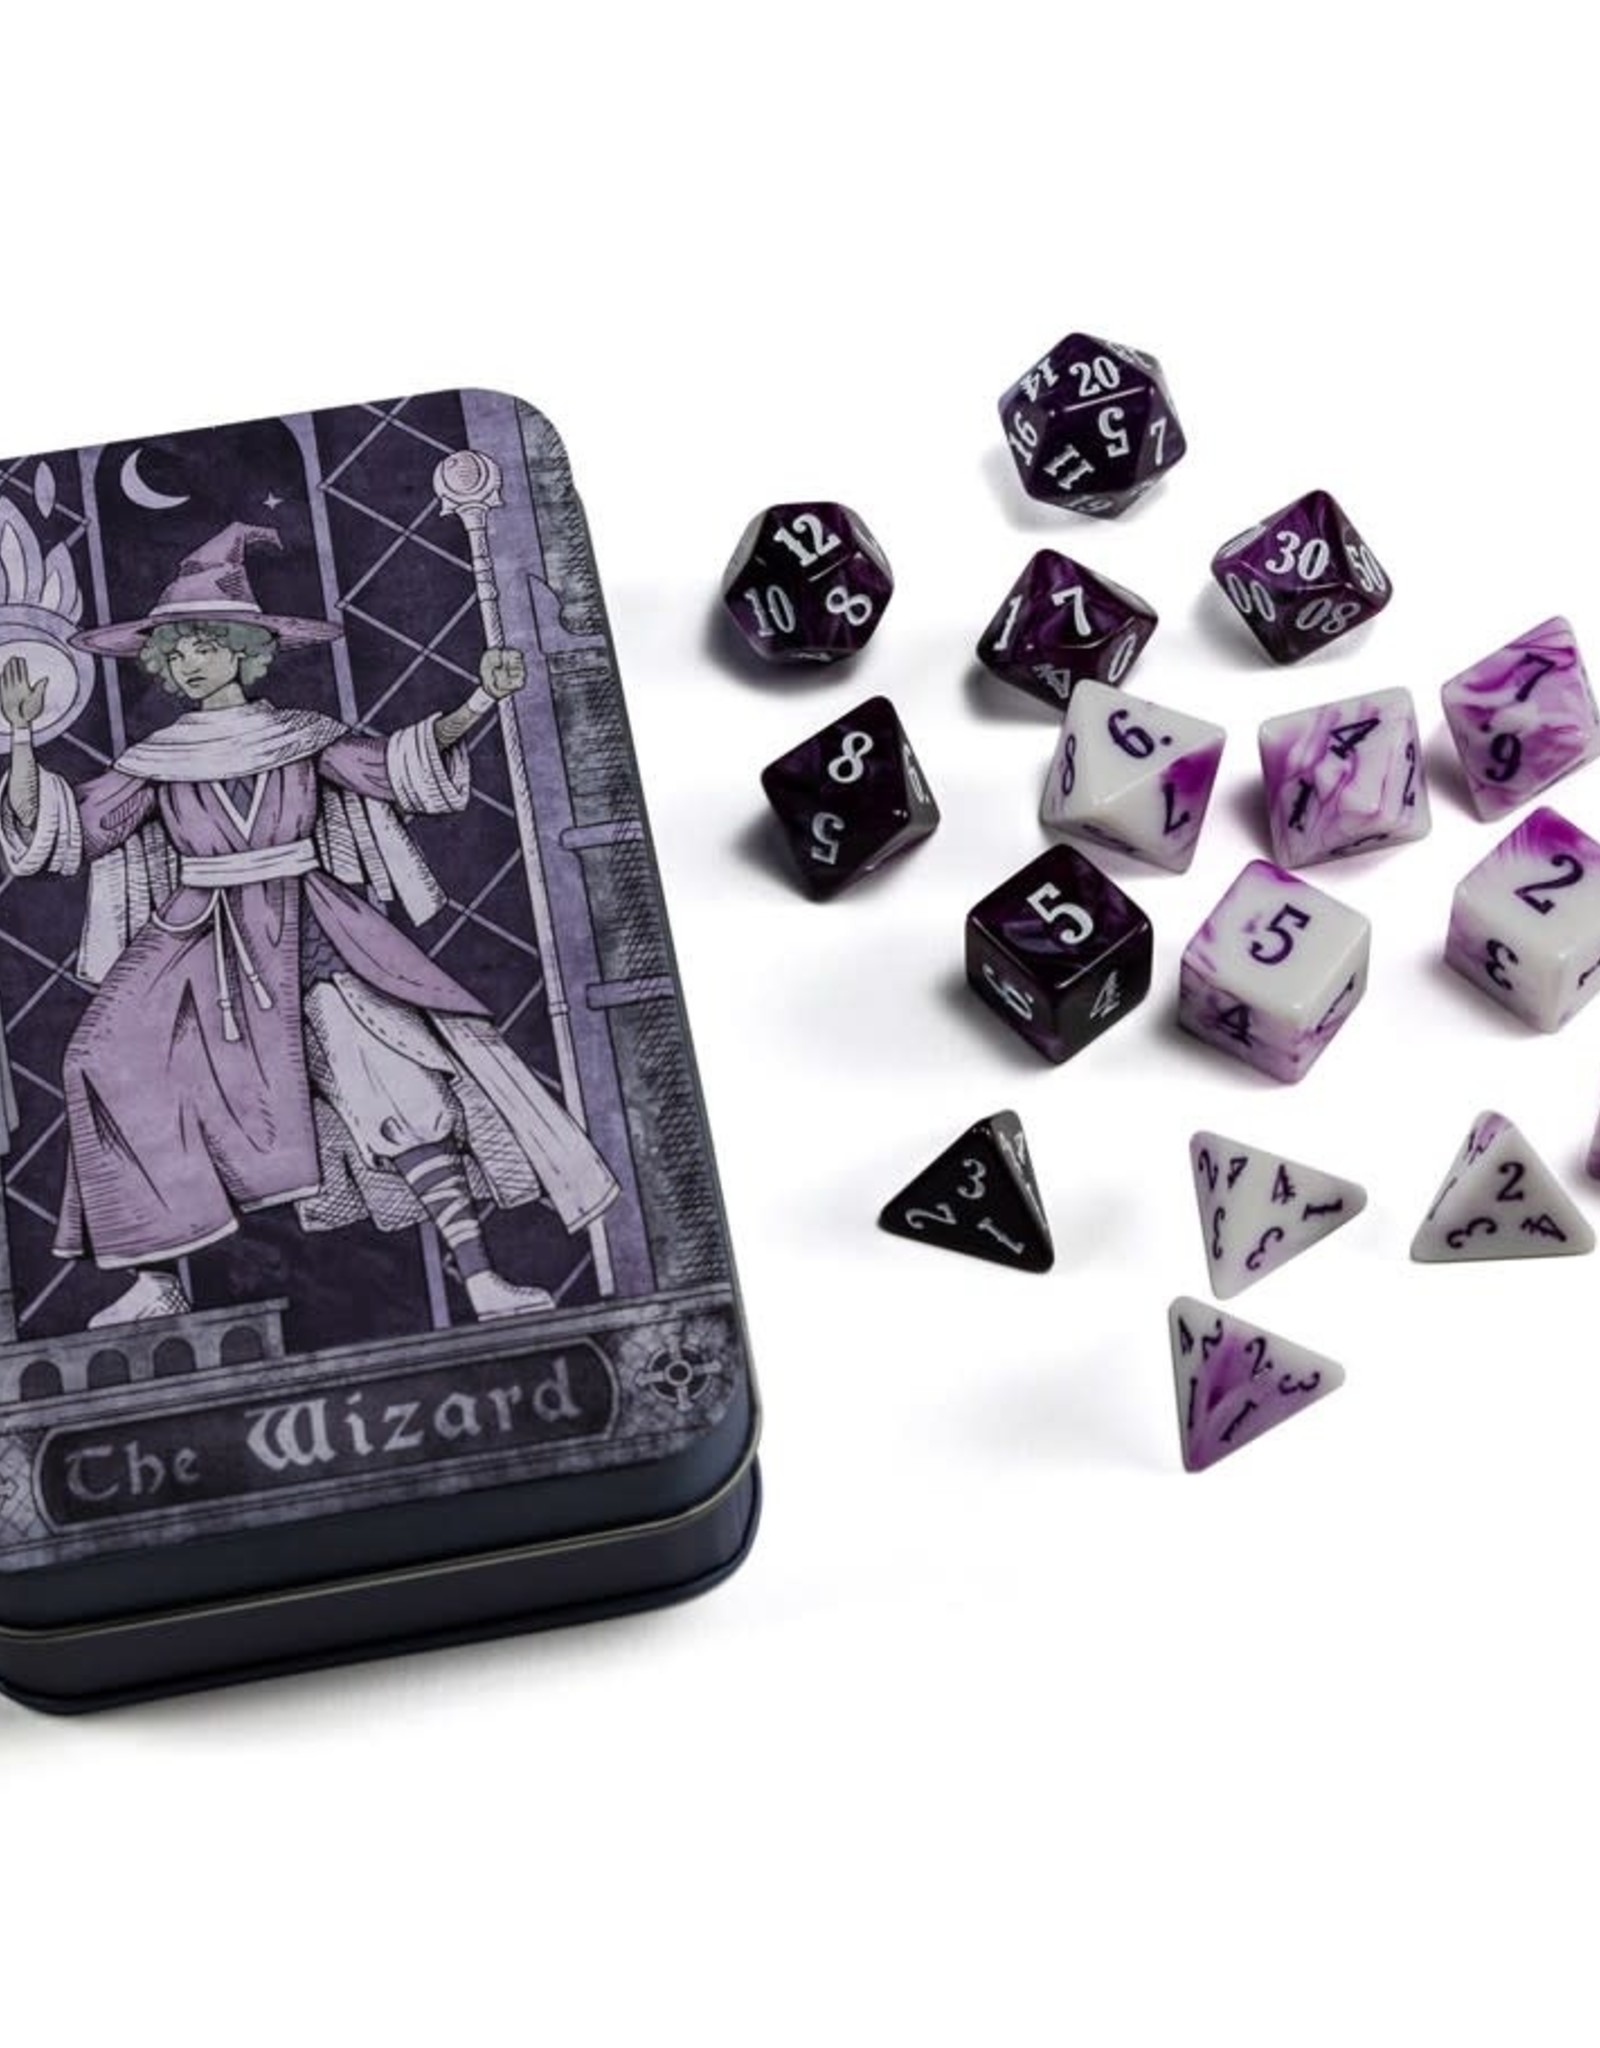 Beadle and Grimm Class Dice Set: Wizard